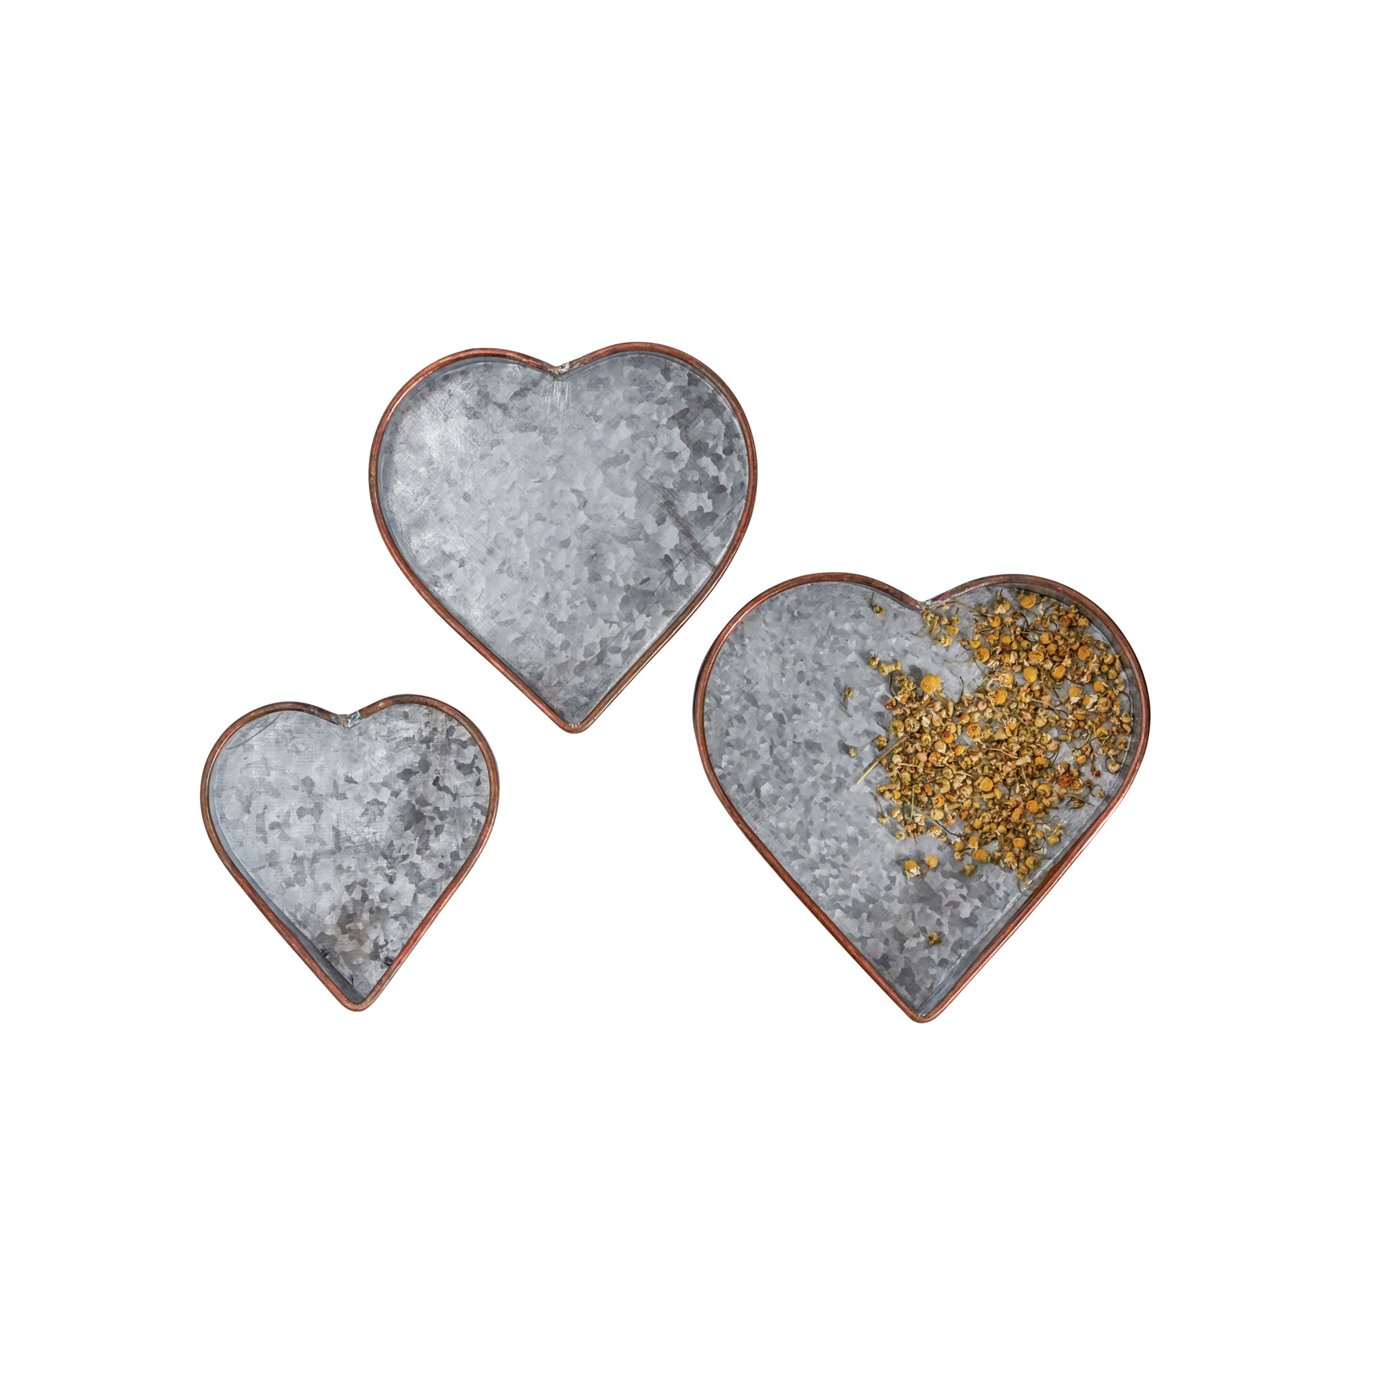 Heart Shaped Galvanized Metal Tray with Copper Rim (Set of 3 Sizes)